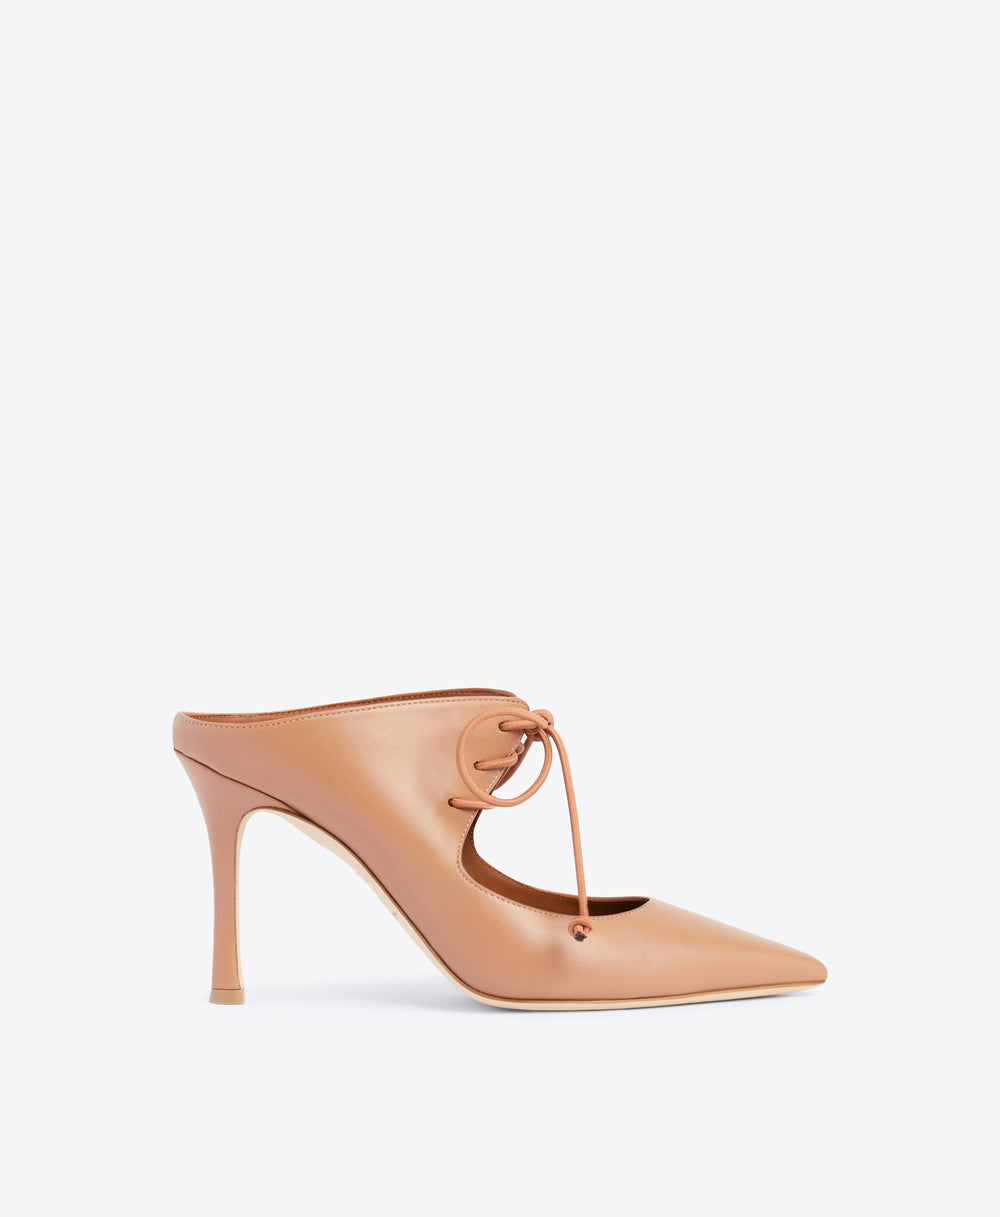 Sepia Nappa Lace-up Mules - Pointed Toe on Flared Stiletto | Malone Souliers